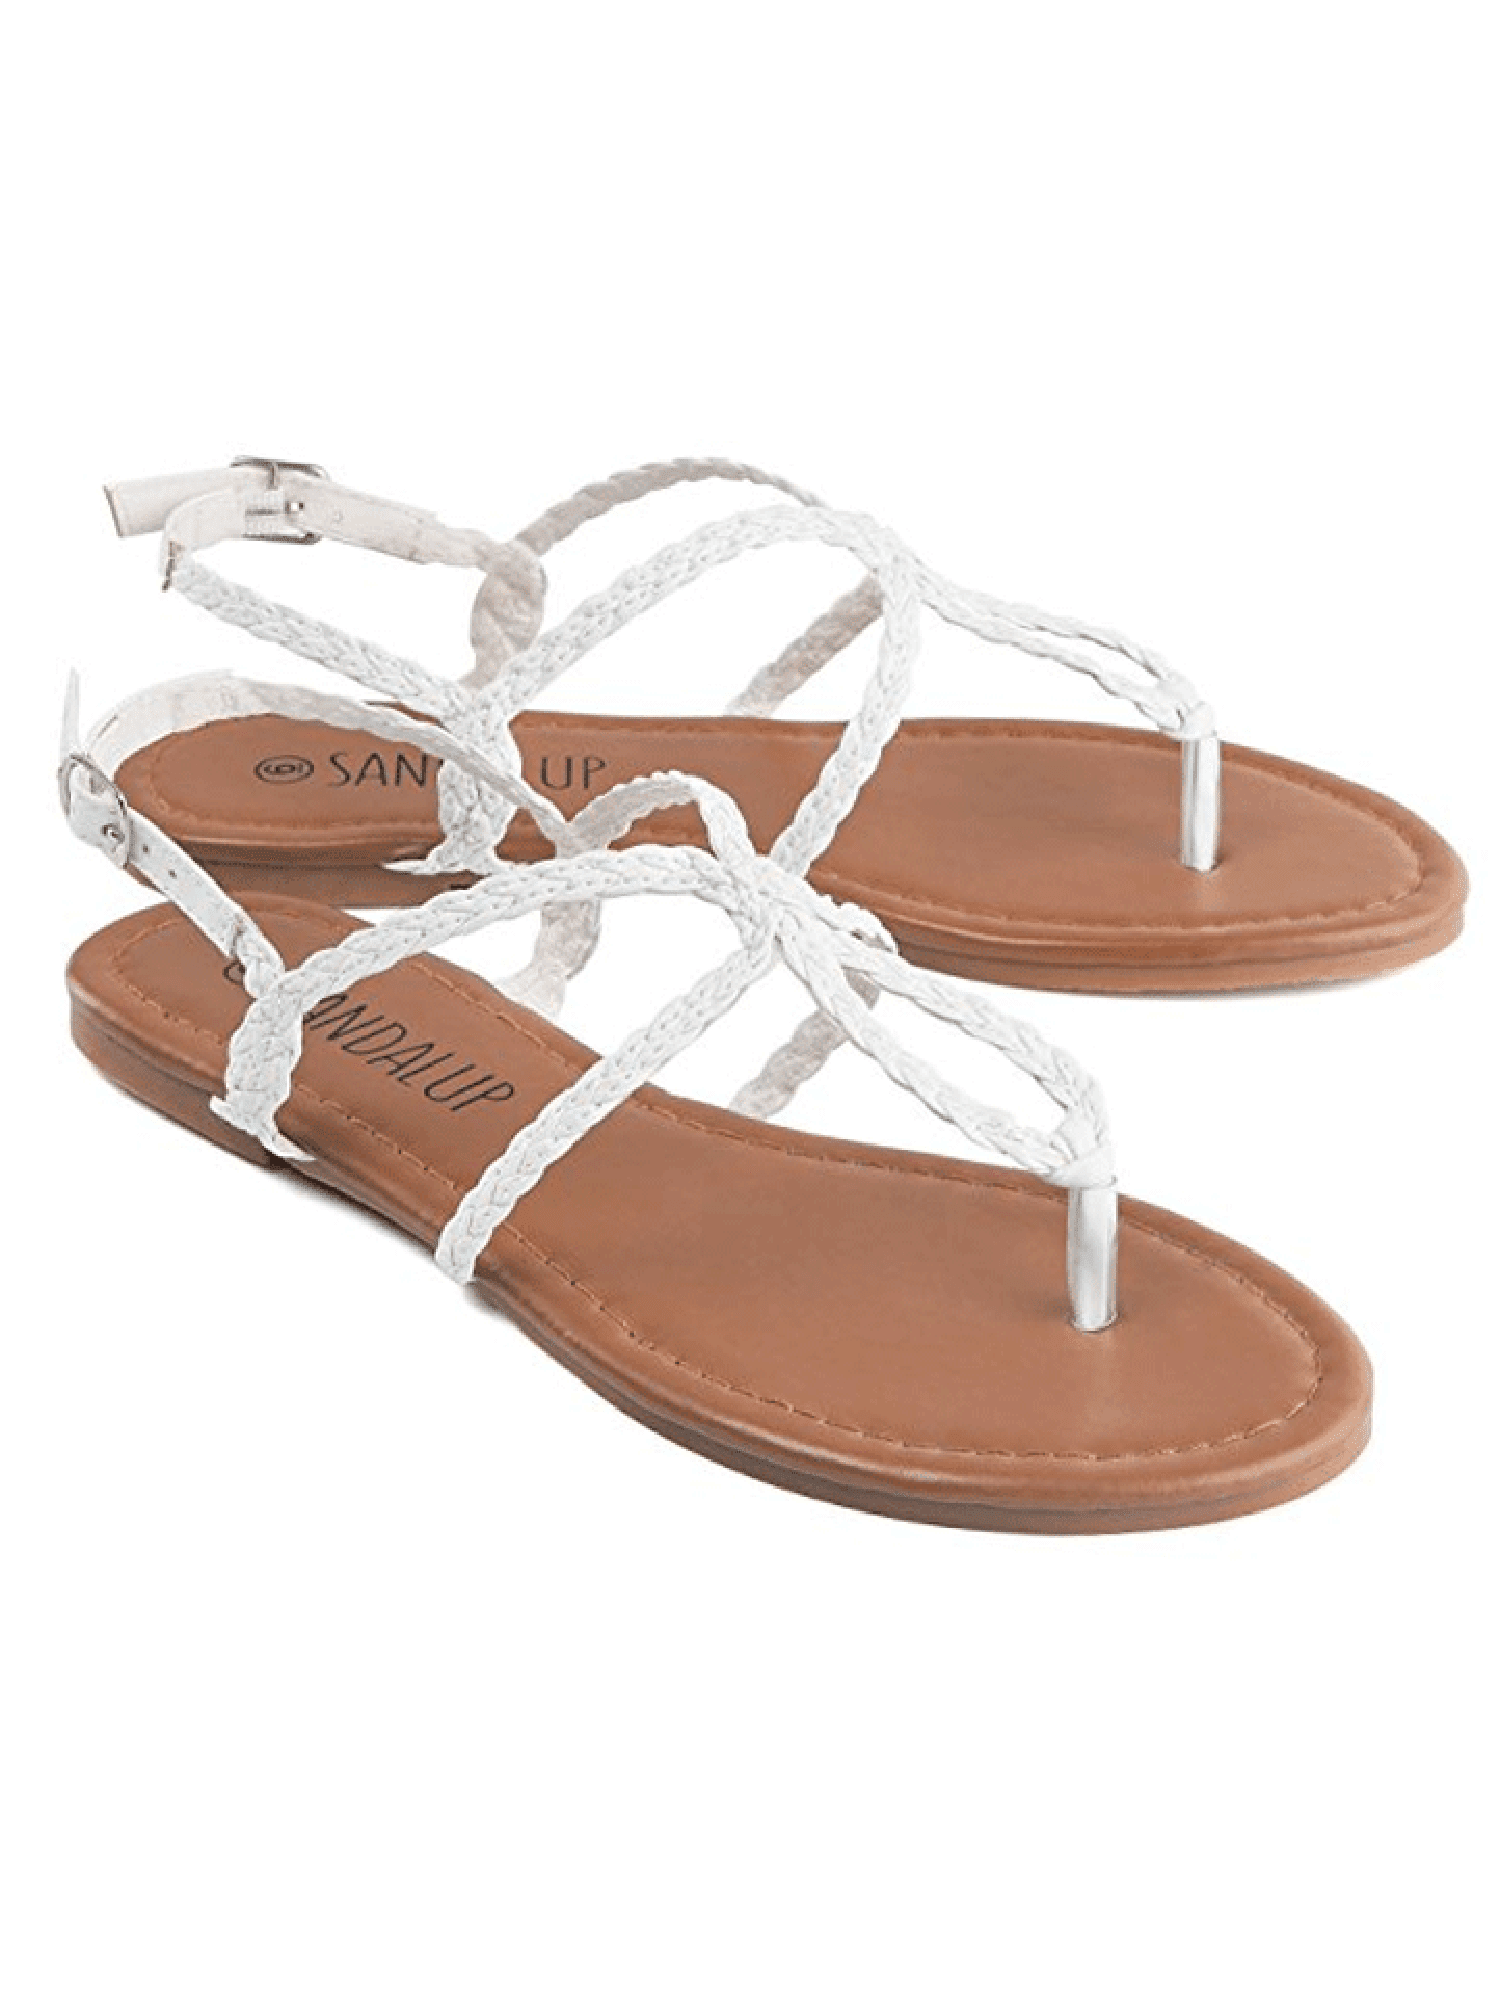 Sandalup Women Clearance Shoes, Summer 